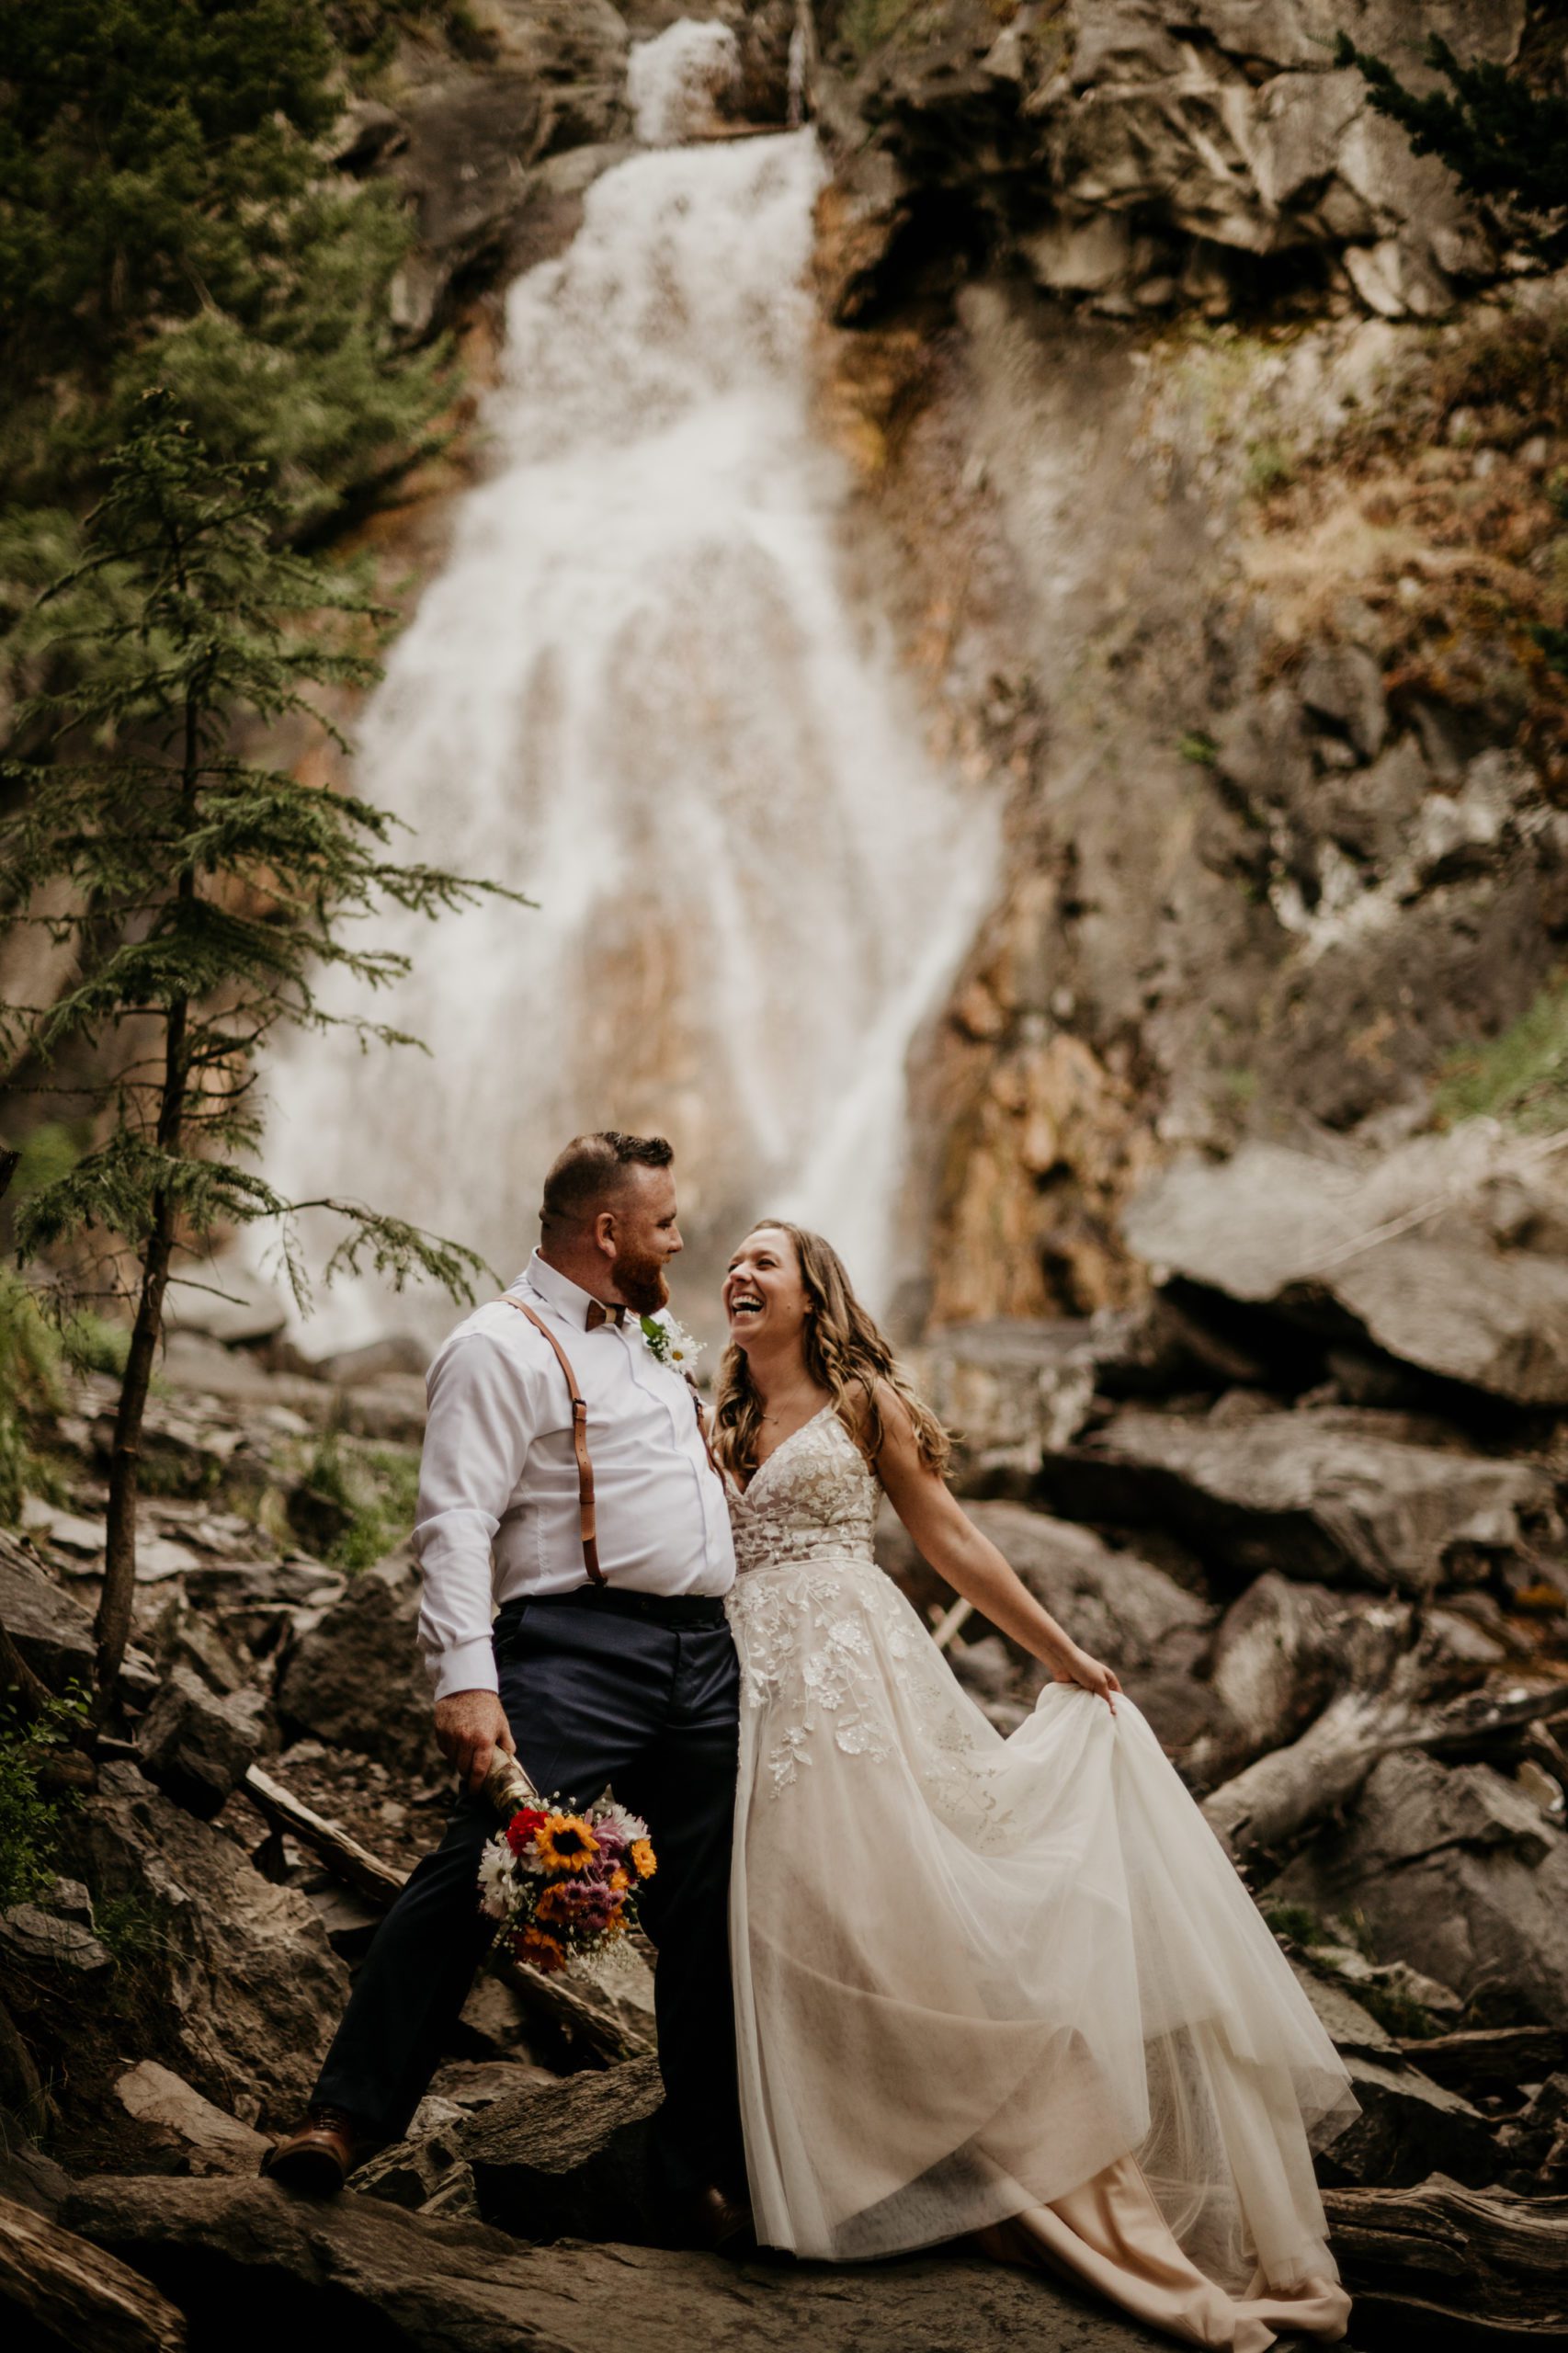 An adventure wedding Holland Lake Falls hiking elopement is the perfect Montana elopement! A great alternative to busy Glacier National Park!